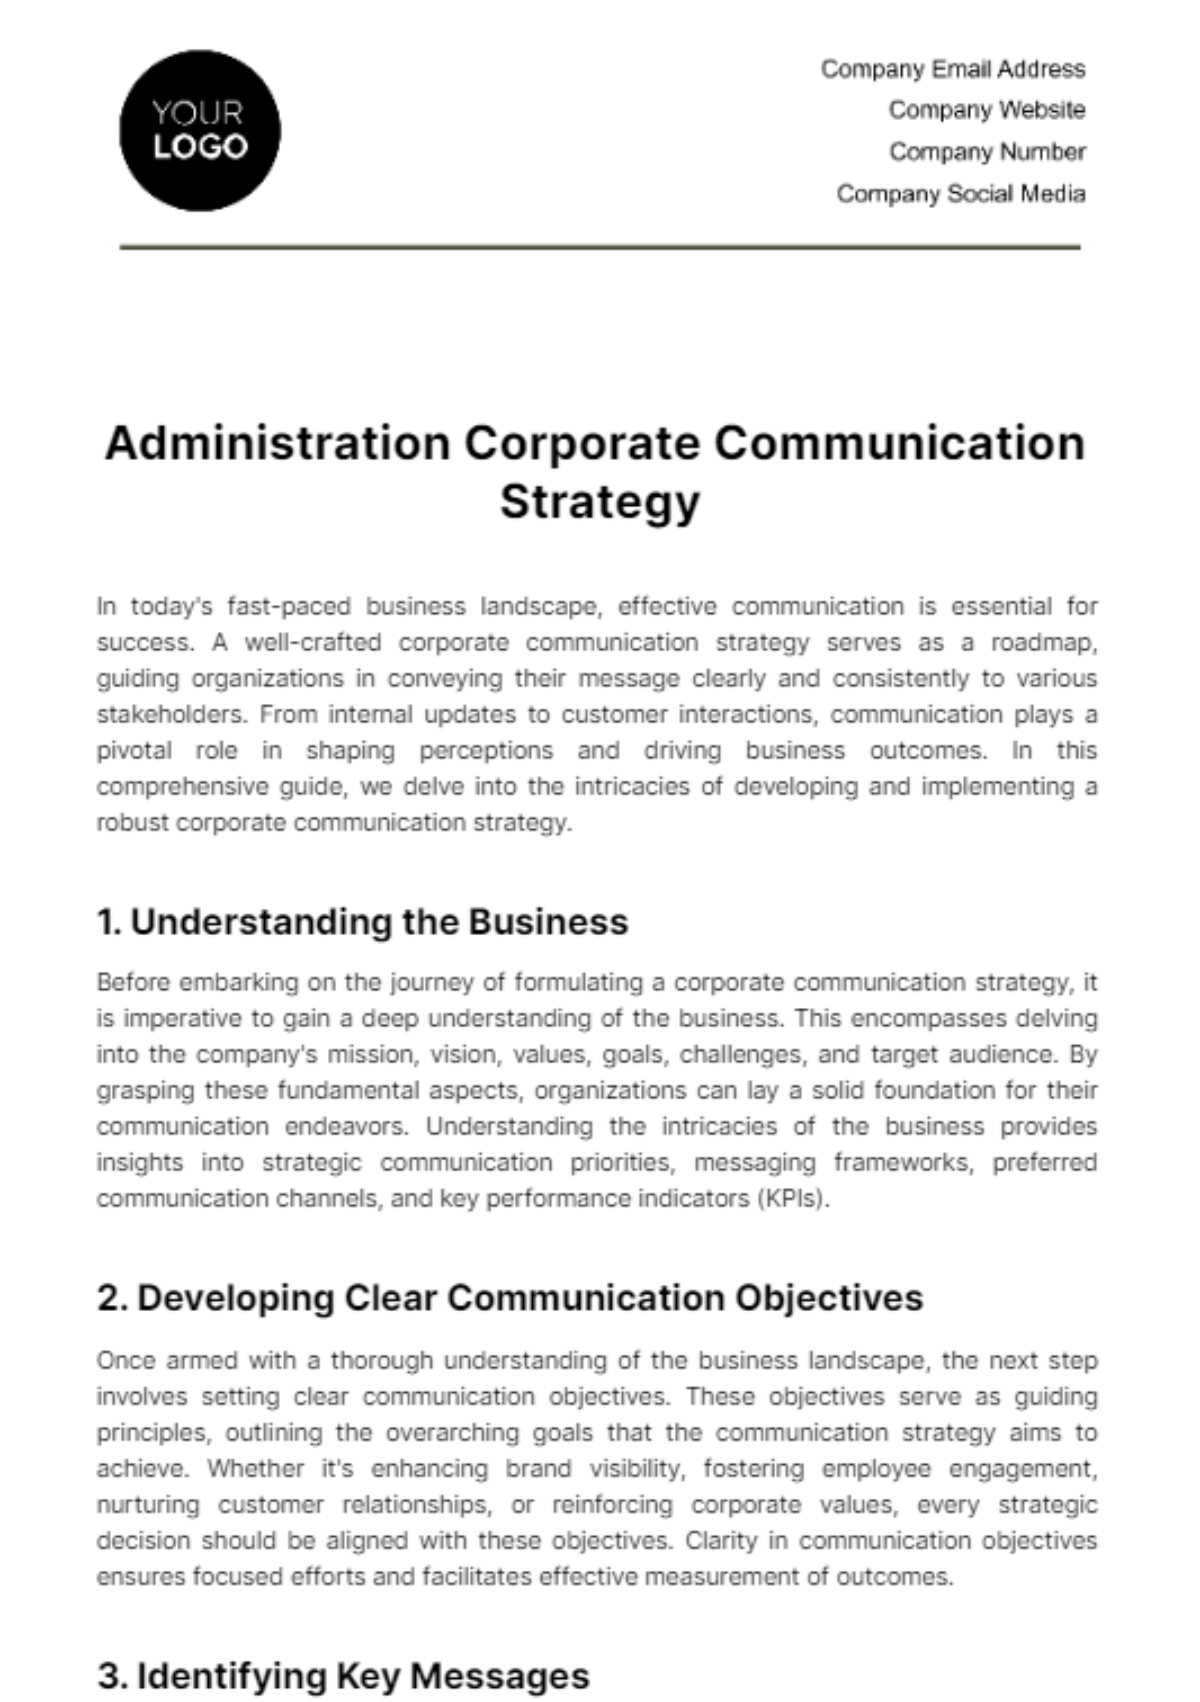 Free Administration Corporate Communication Strategy Template